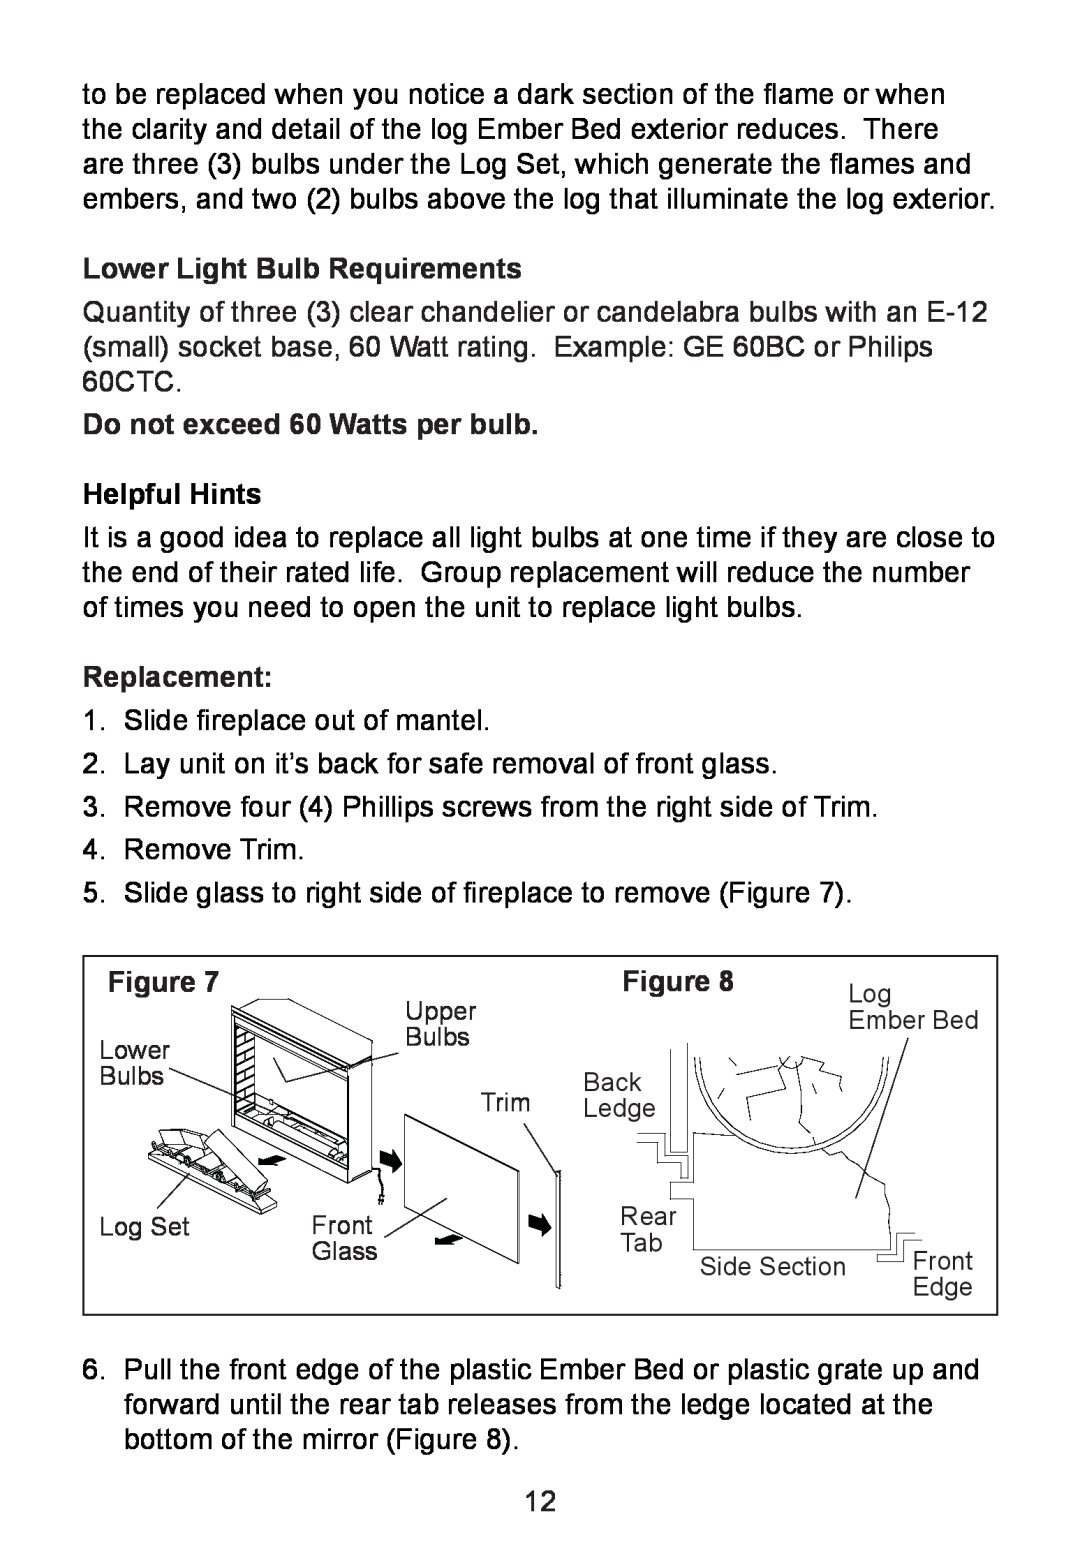 Dimplex BF8000ST owner manual Lower Light Bulb Requirements, Do not exceed 60 Watts per bulb Helpful Hints, Replacement 